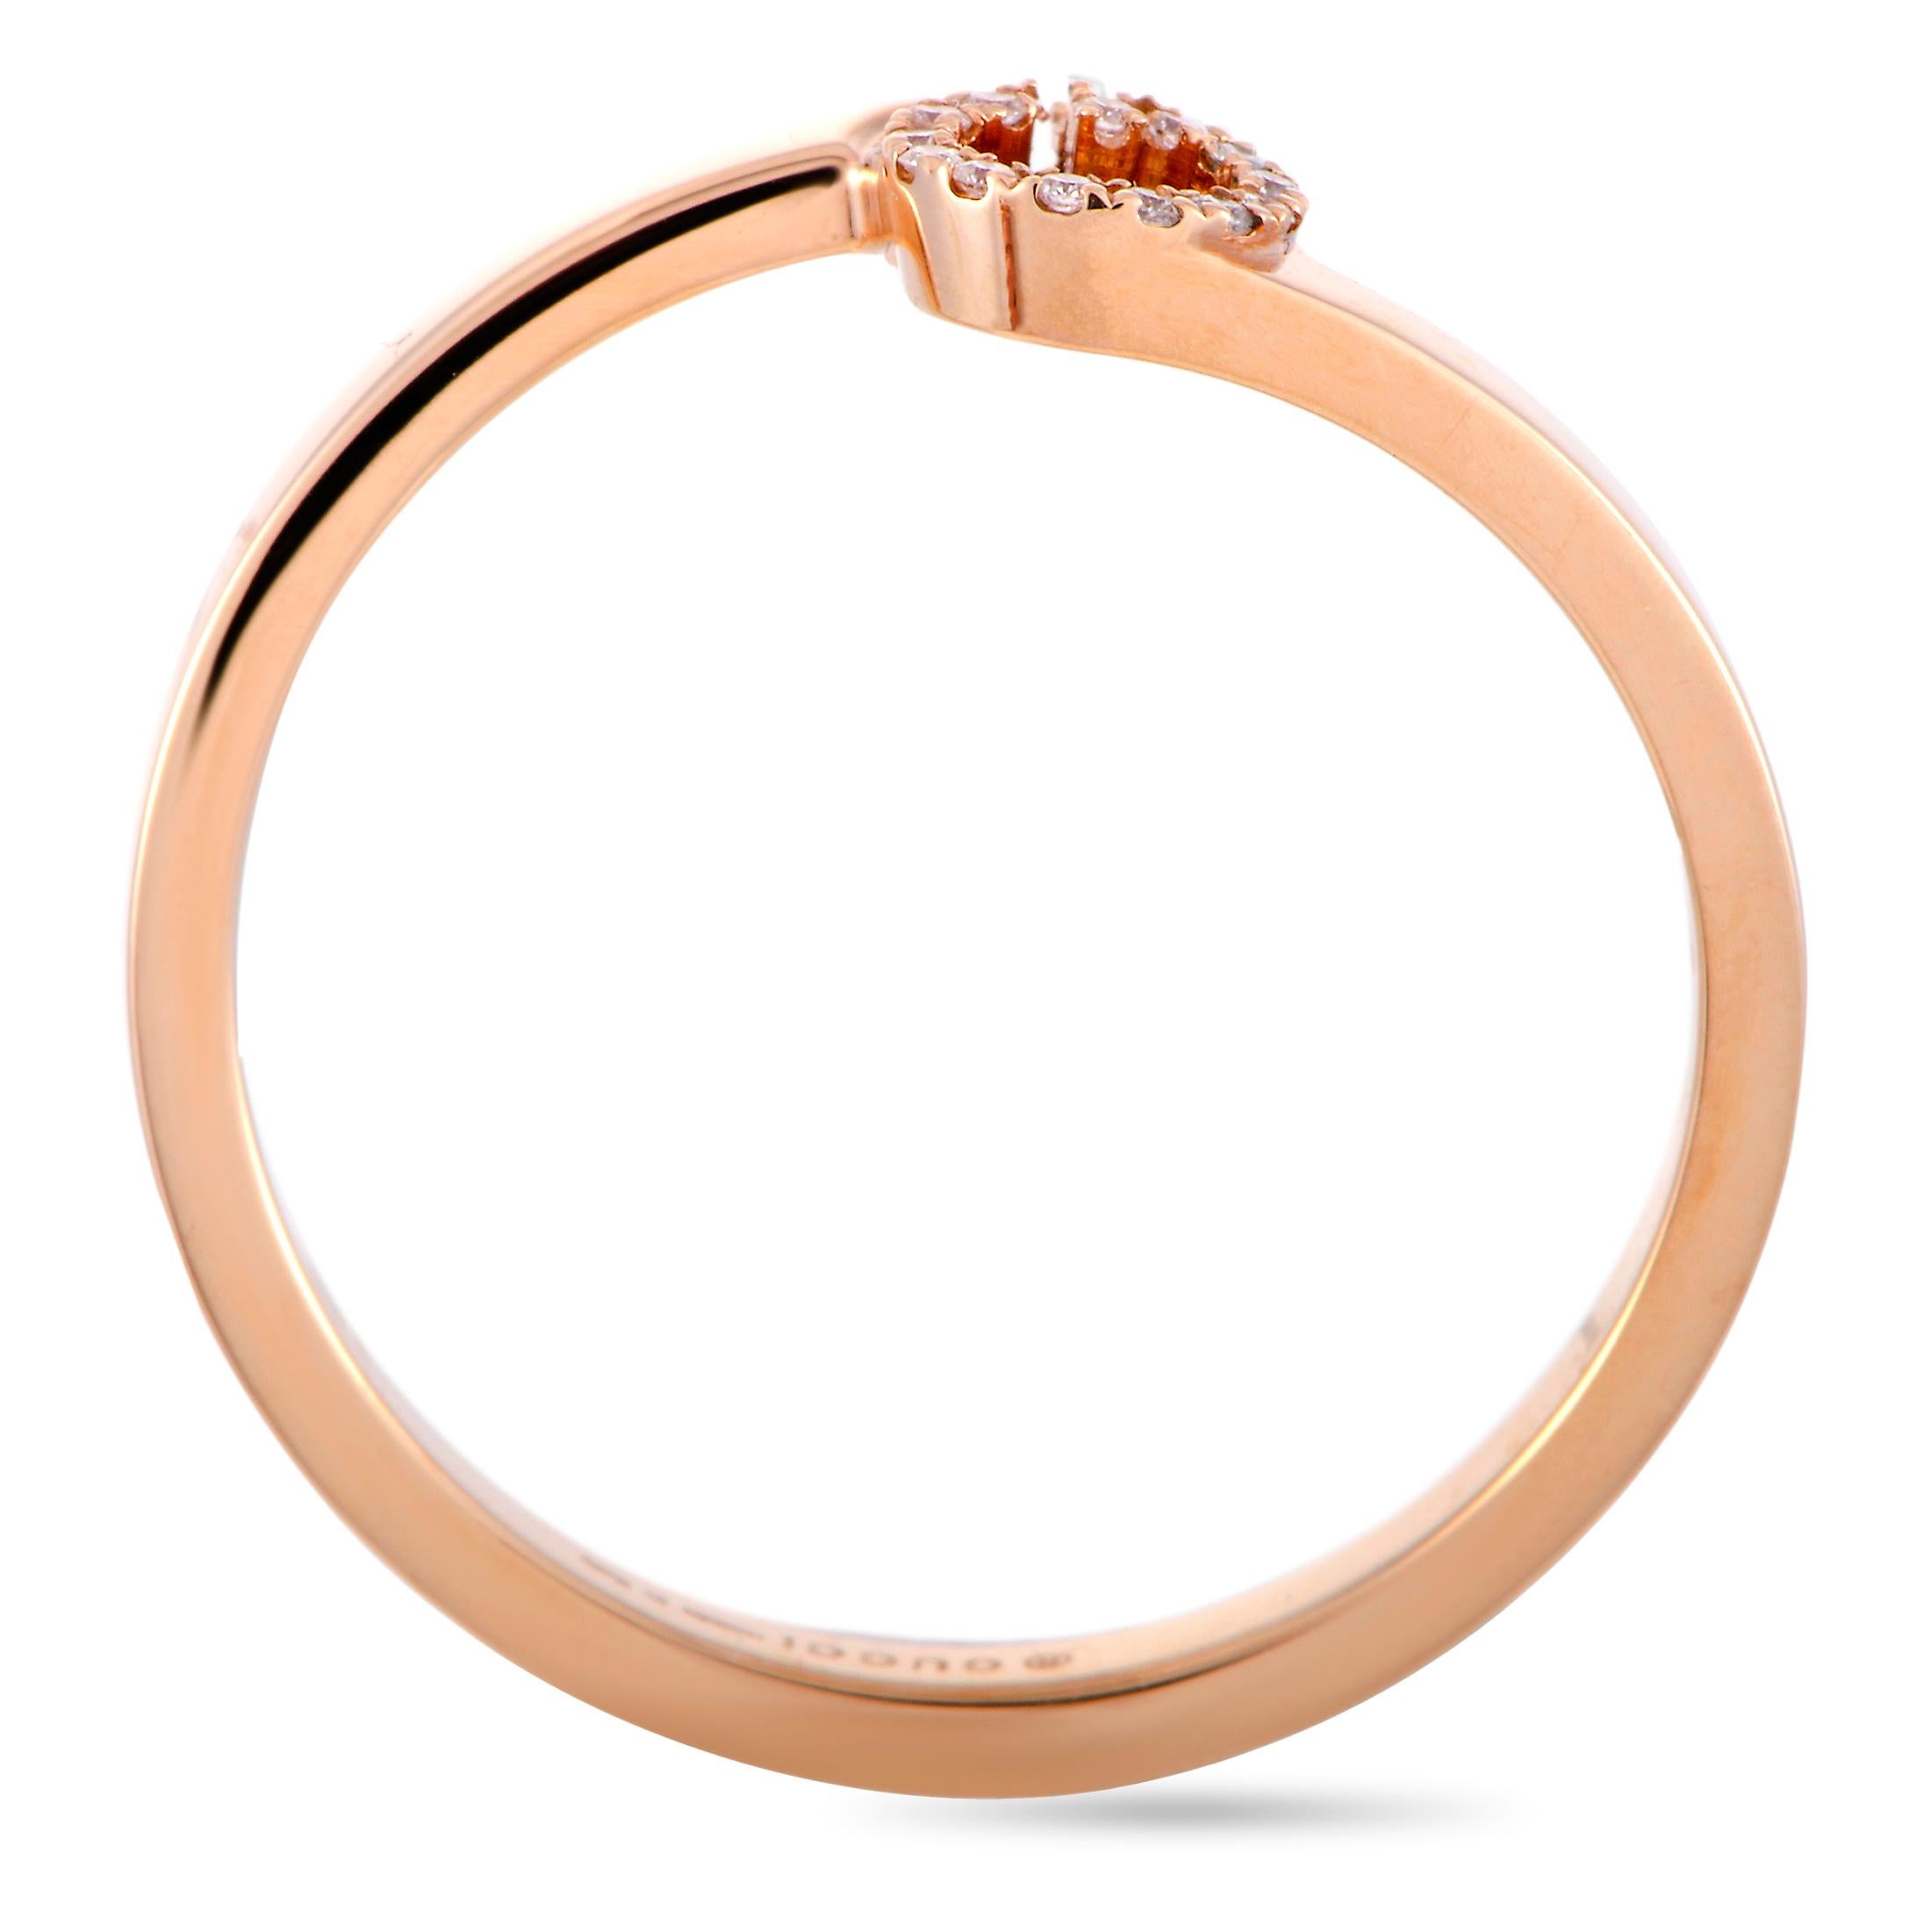 The “GG Running” ring by Gucci is made out of 18K rose gold and diamonds and weighs 2.6 grams. The ring boasts band thickness of 2 mm and top height of 2 mm, while top dimensions measure 7 by 5 mm.

This item is offered in brand new condition and